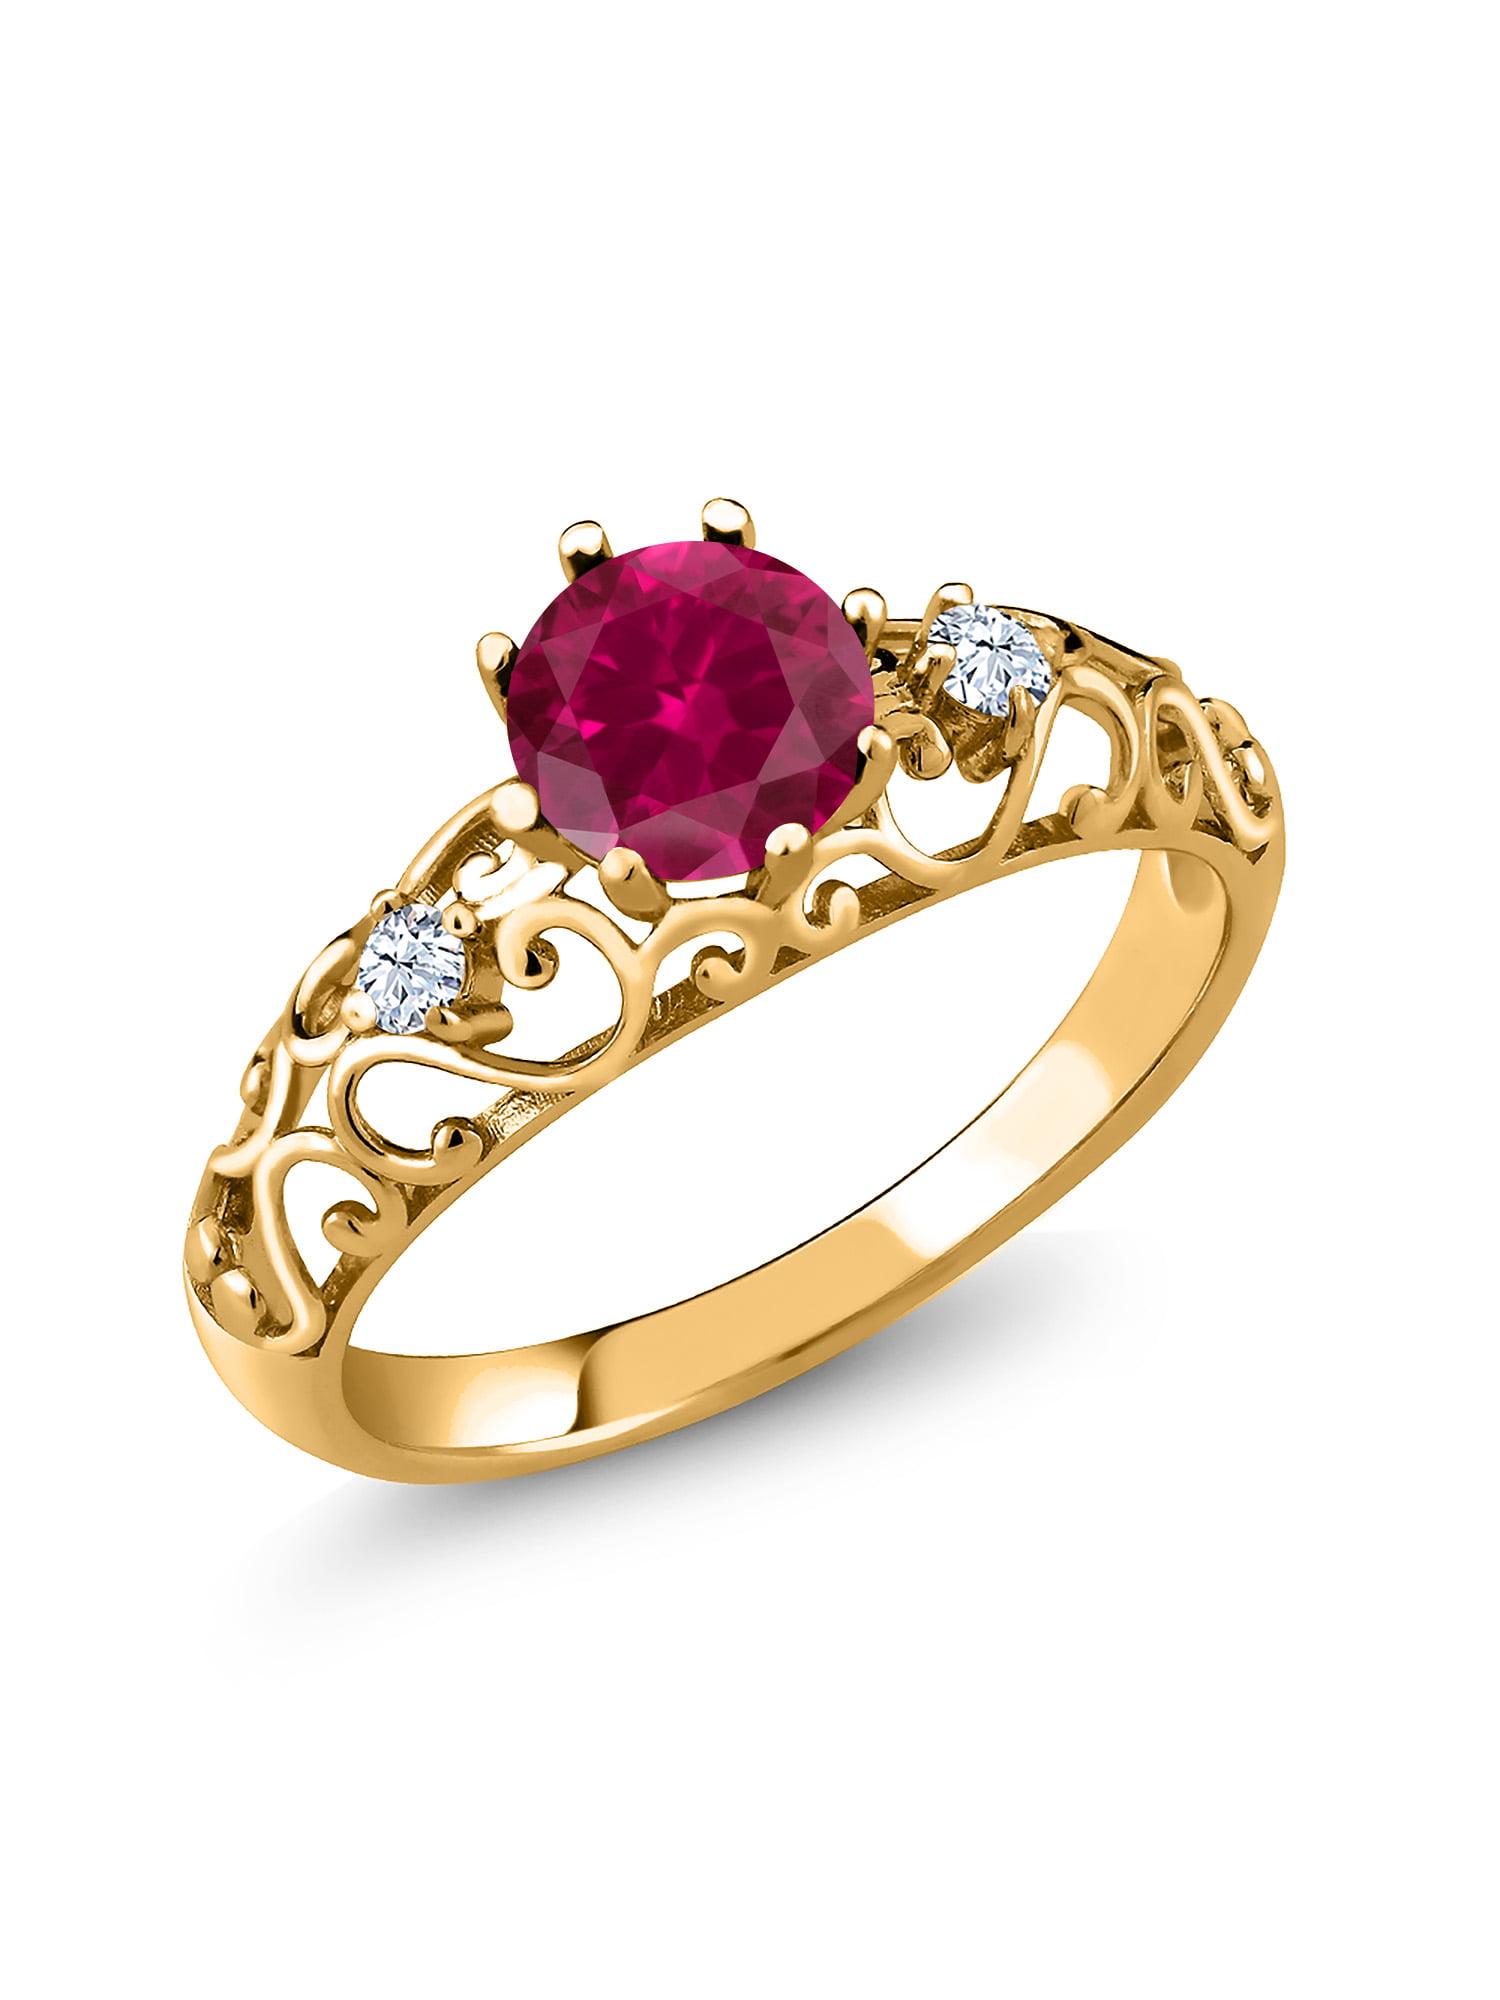 1.08CT Diamond & Ruby Bangle in 14K Gold Over Best Suited for Parties